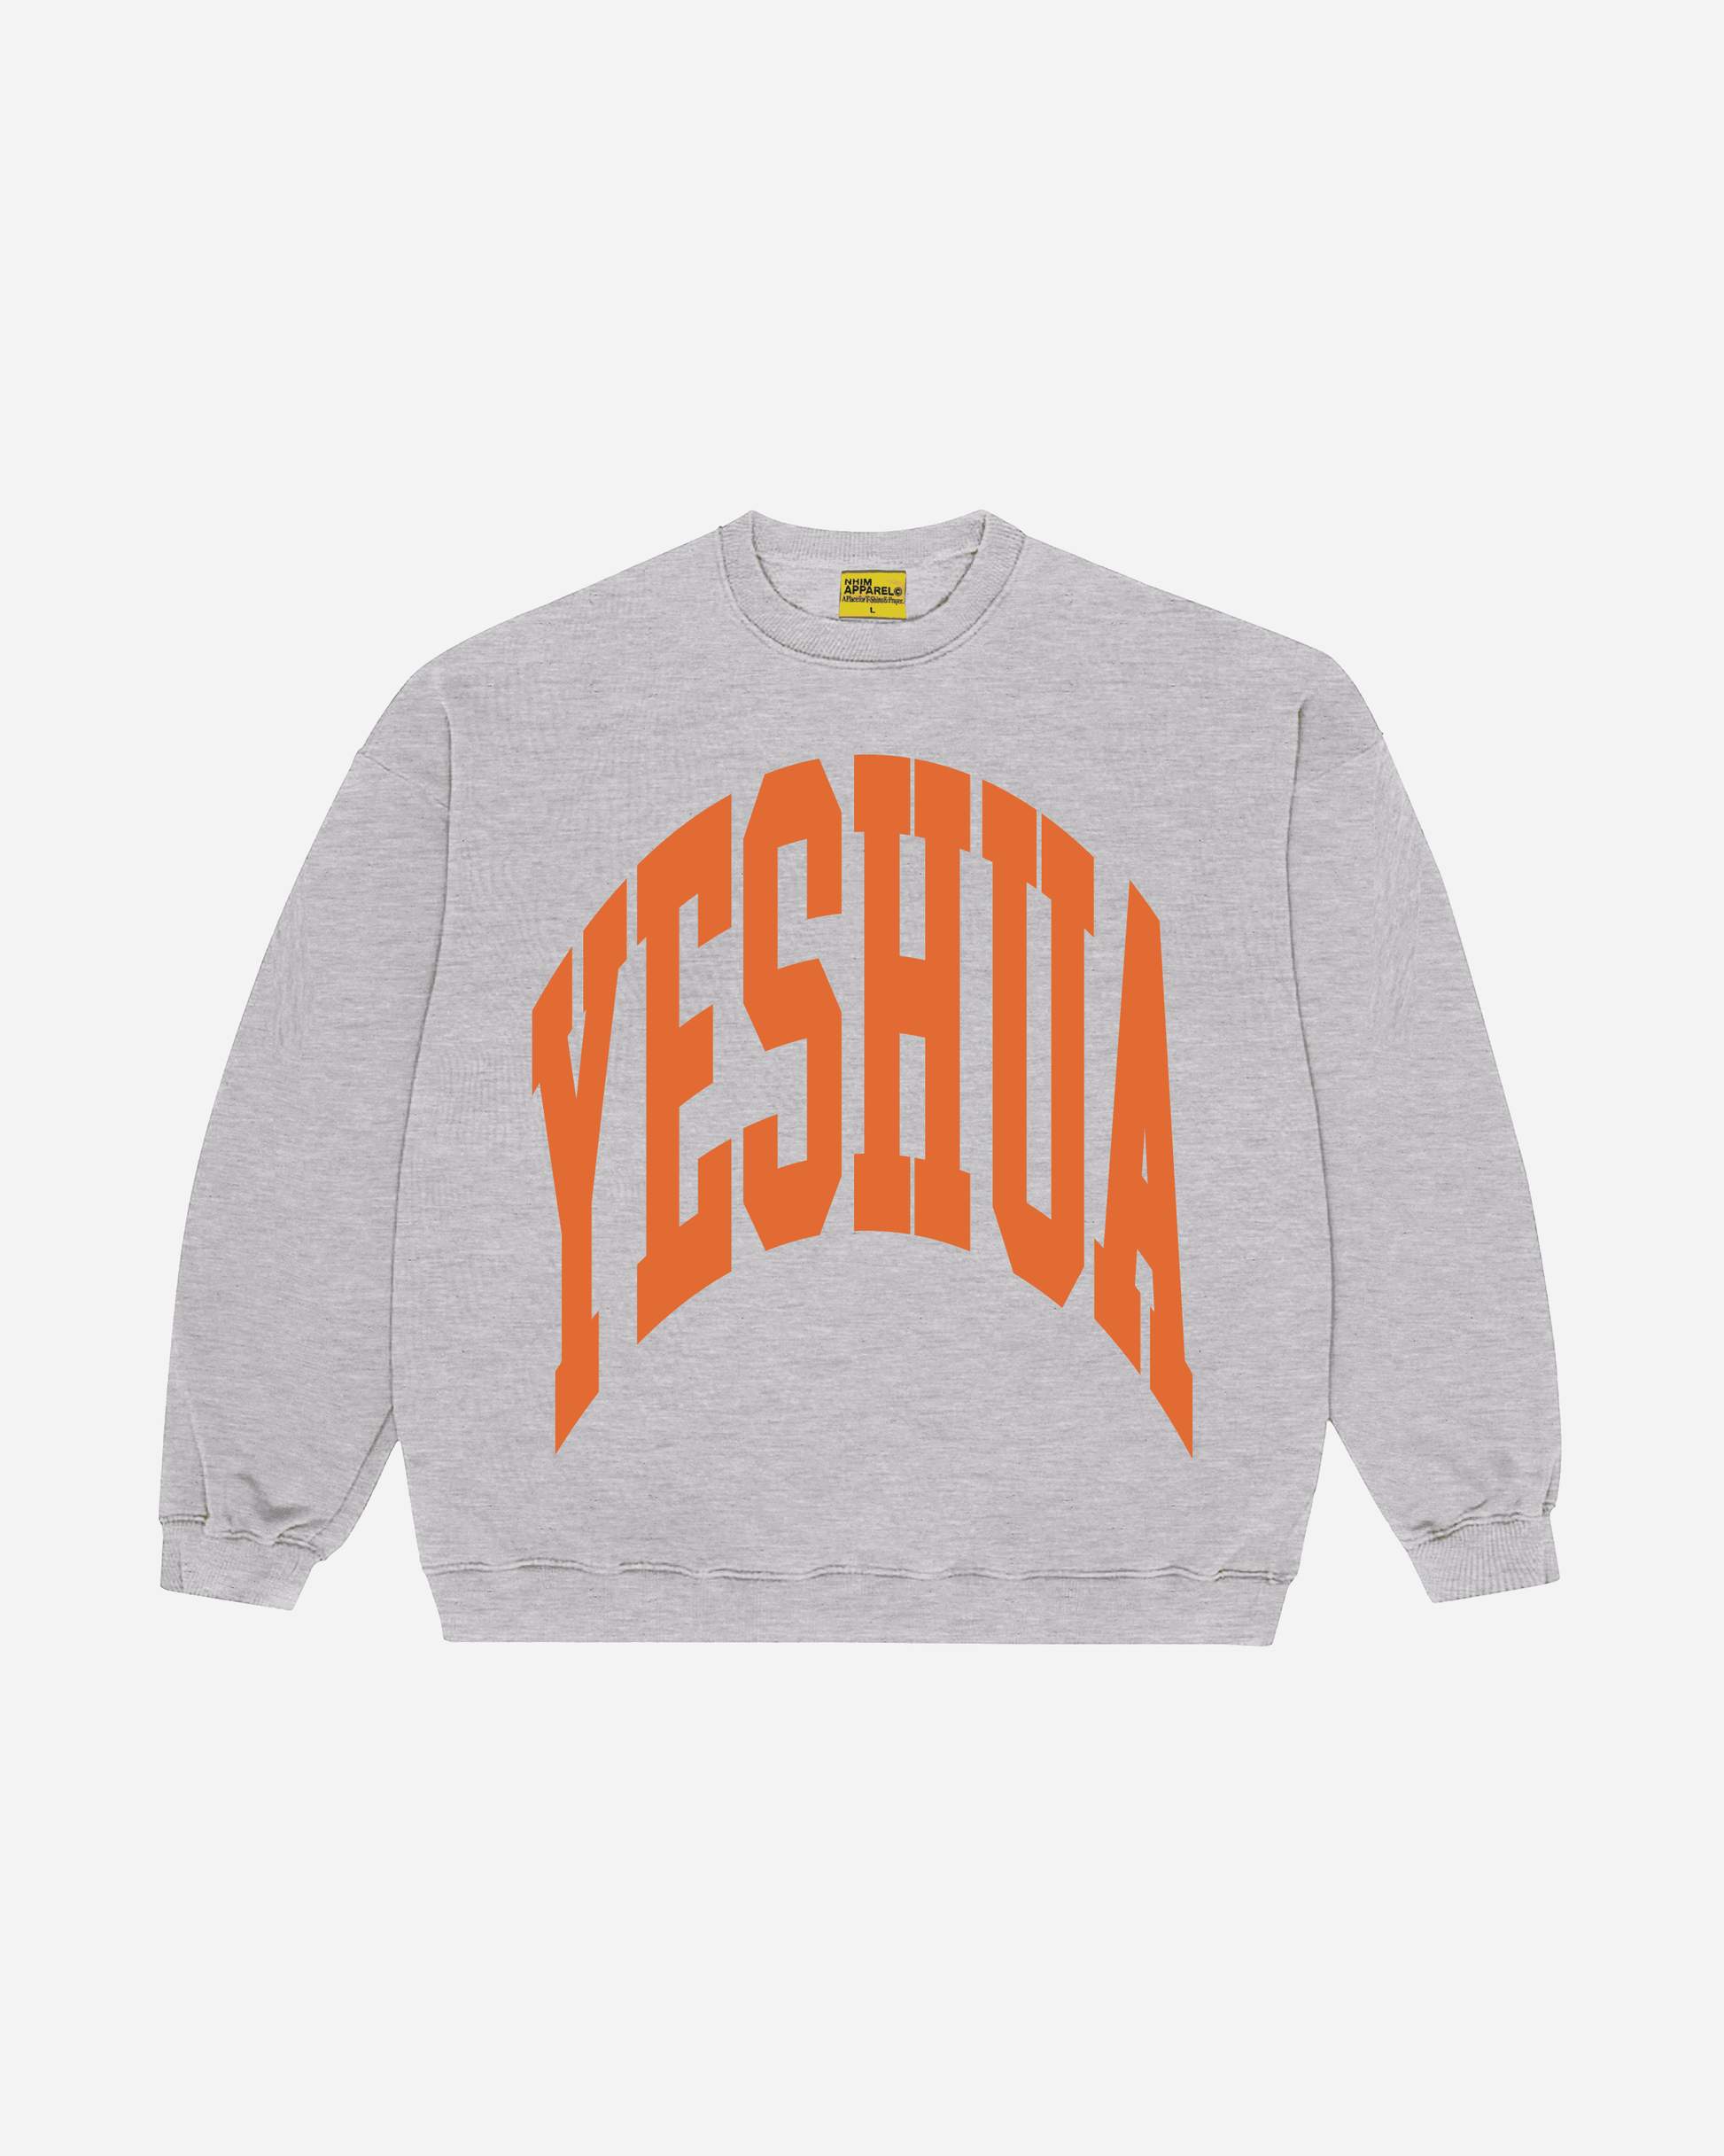 The Yeshua Spirit crewneck sweatshirt in ash grey by NHIM Apparel Christian clothing brand. He came to heal us, deliver us, and make us whole.